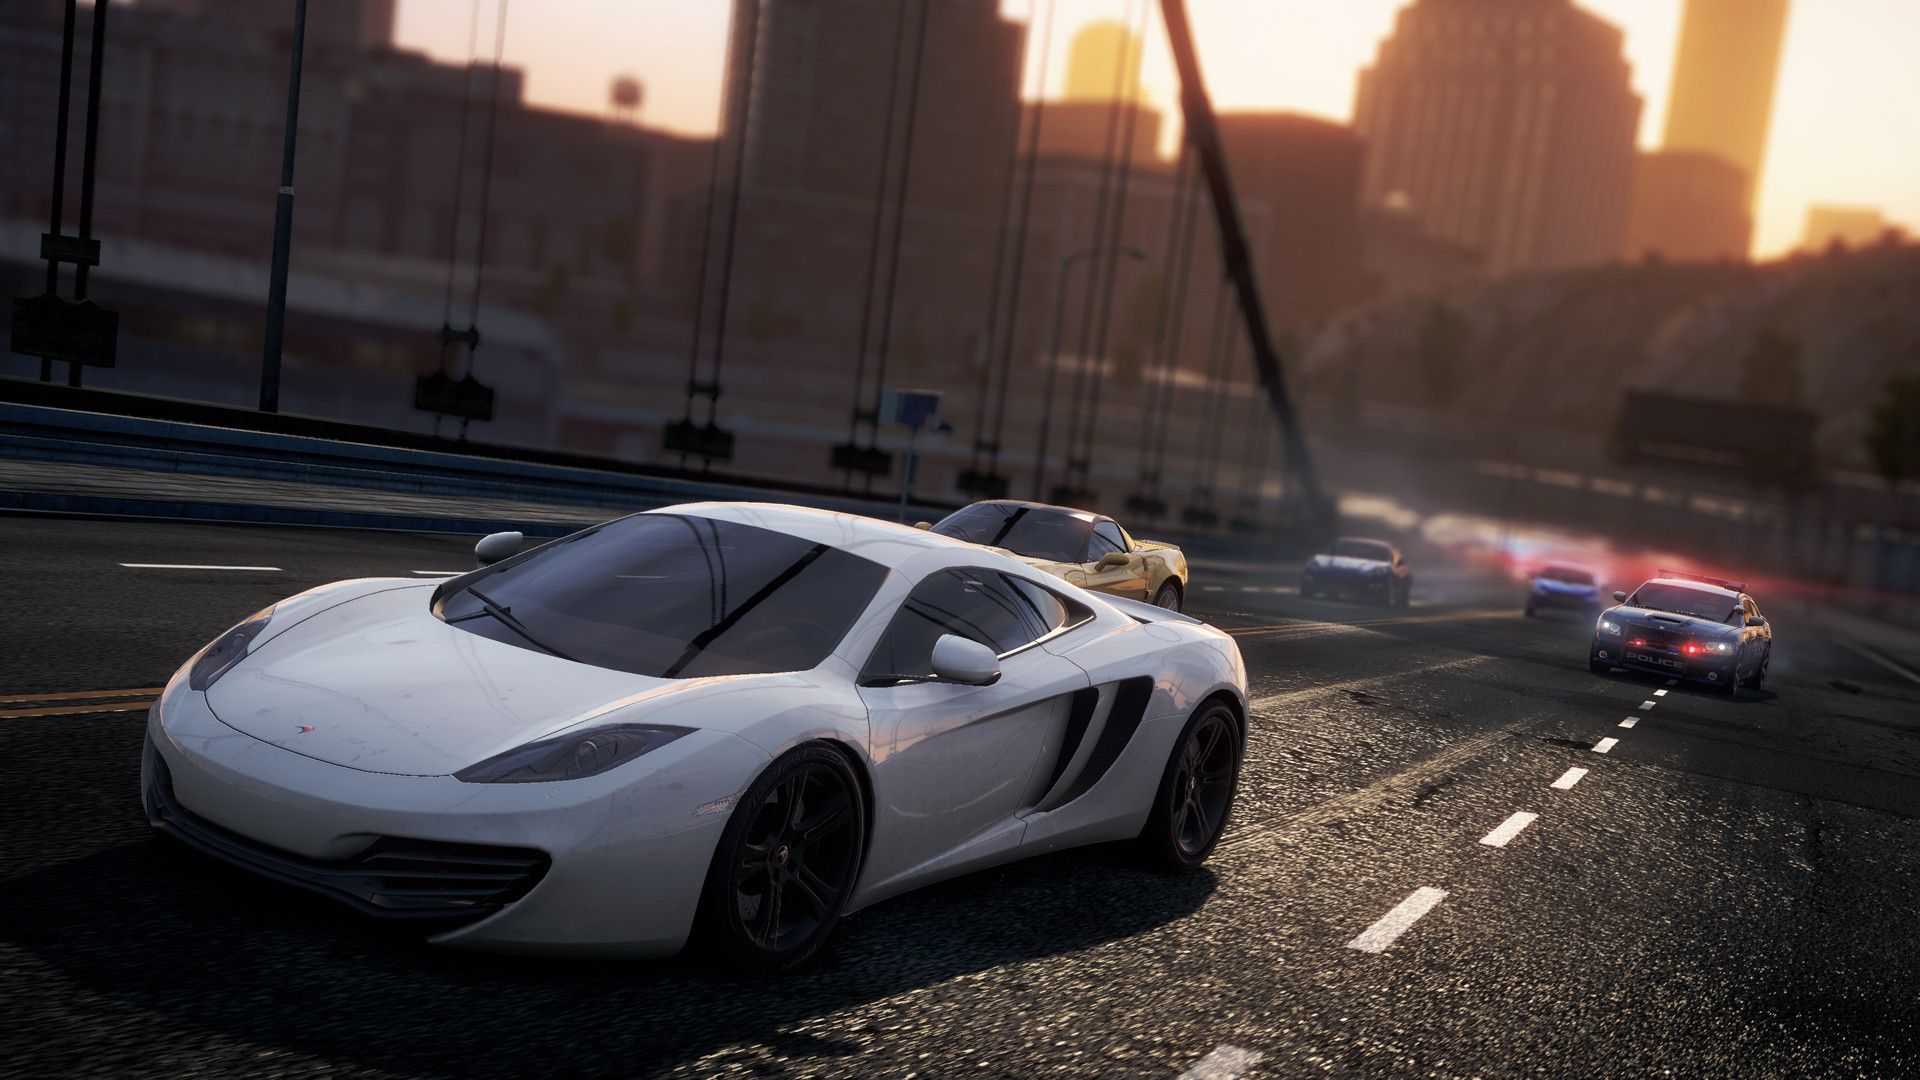 72 Need For Speed Most Wanted Cars Wallpapers On